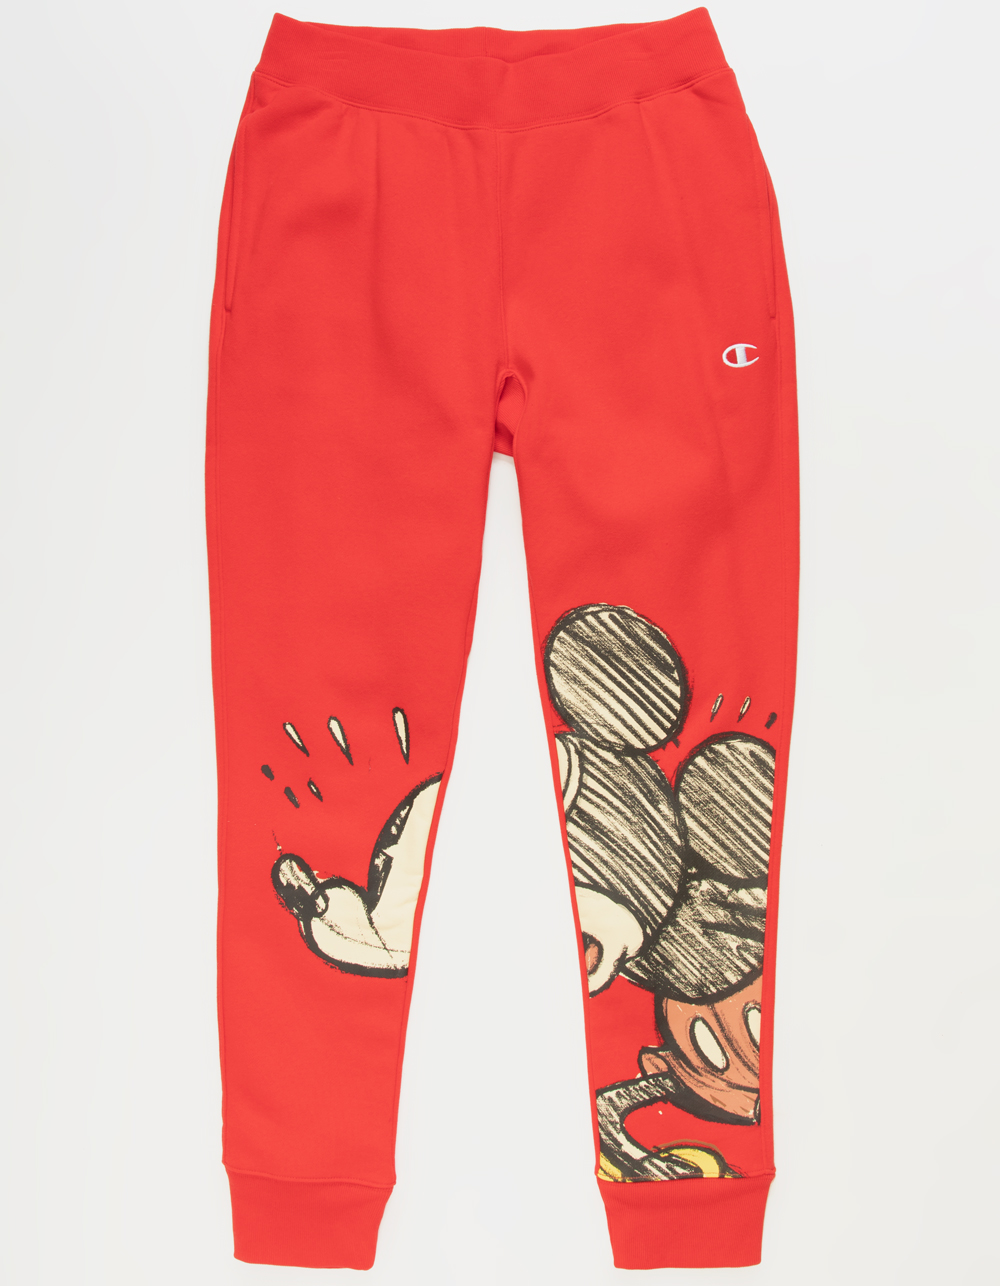 Mickey Mouse and Friends Sweatpants for Men – Disneyland